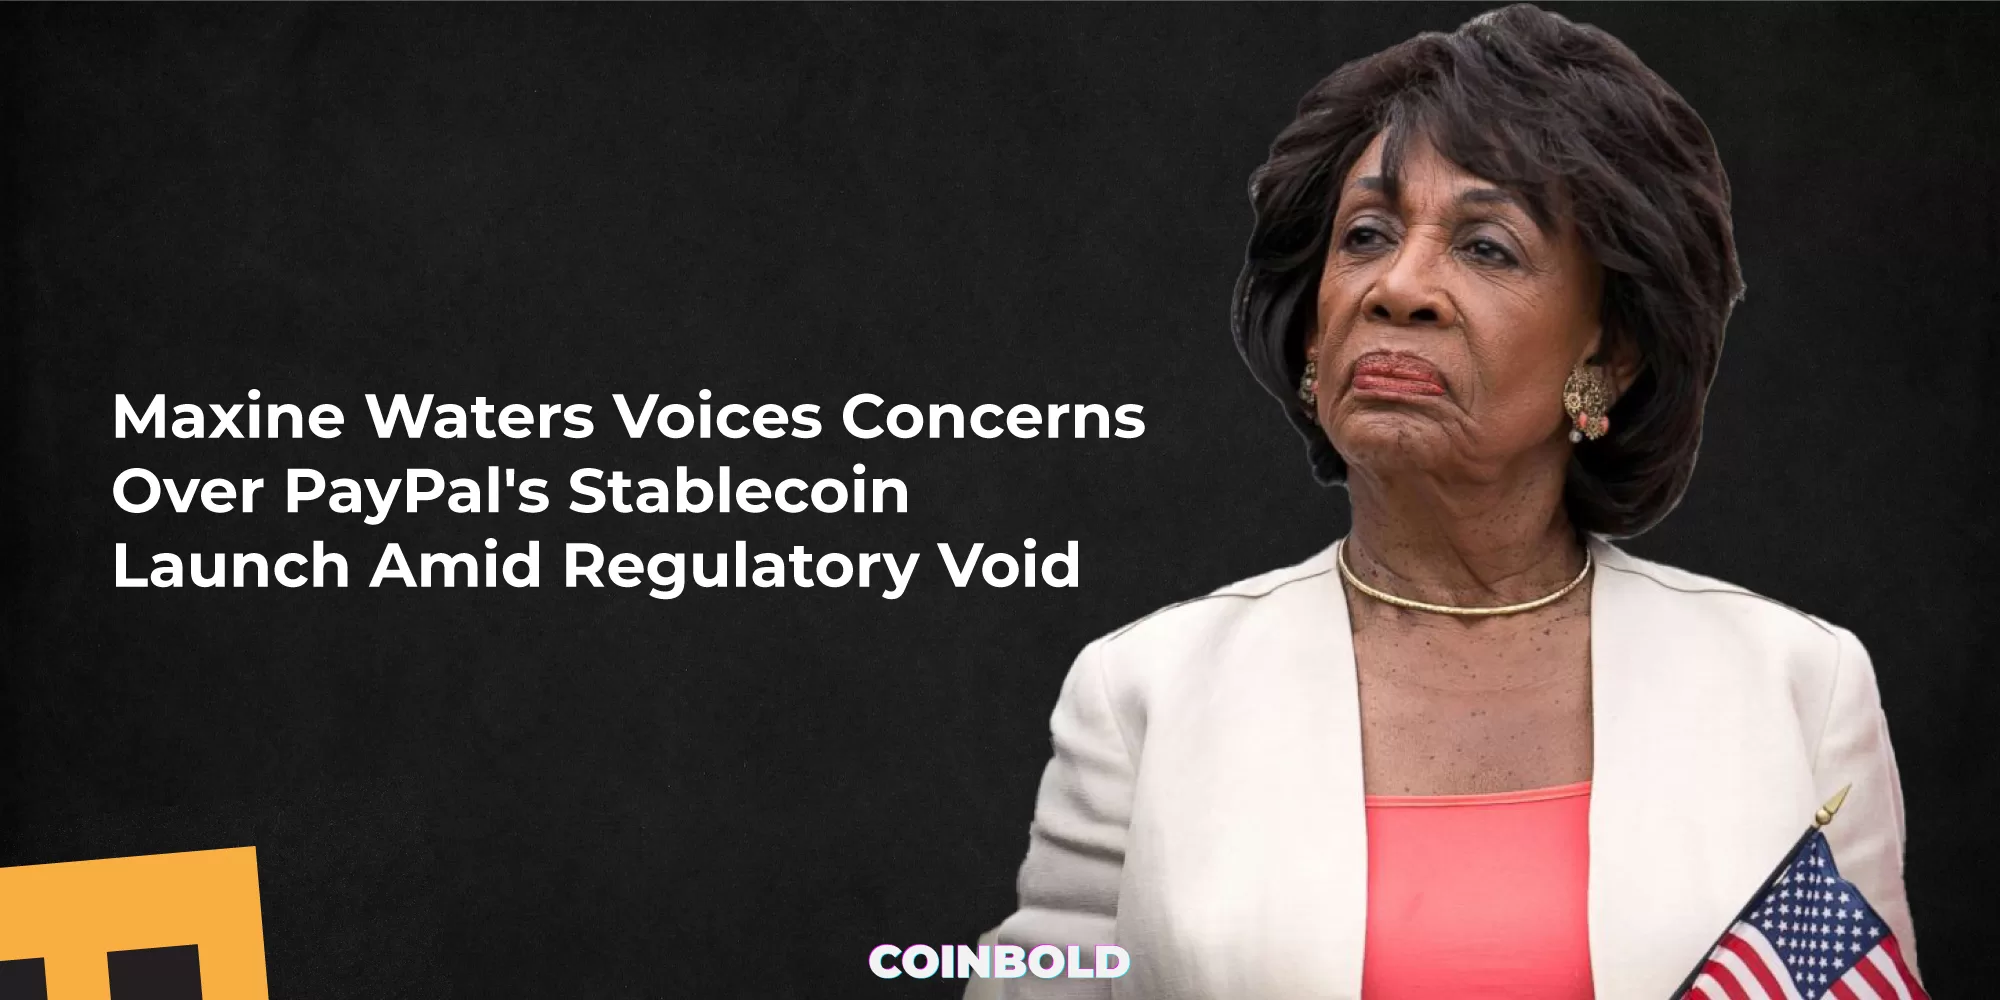 Maxine Waters Voices Concerns Over PayPal's Stablecoin Launch Amid Regulatory Void